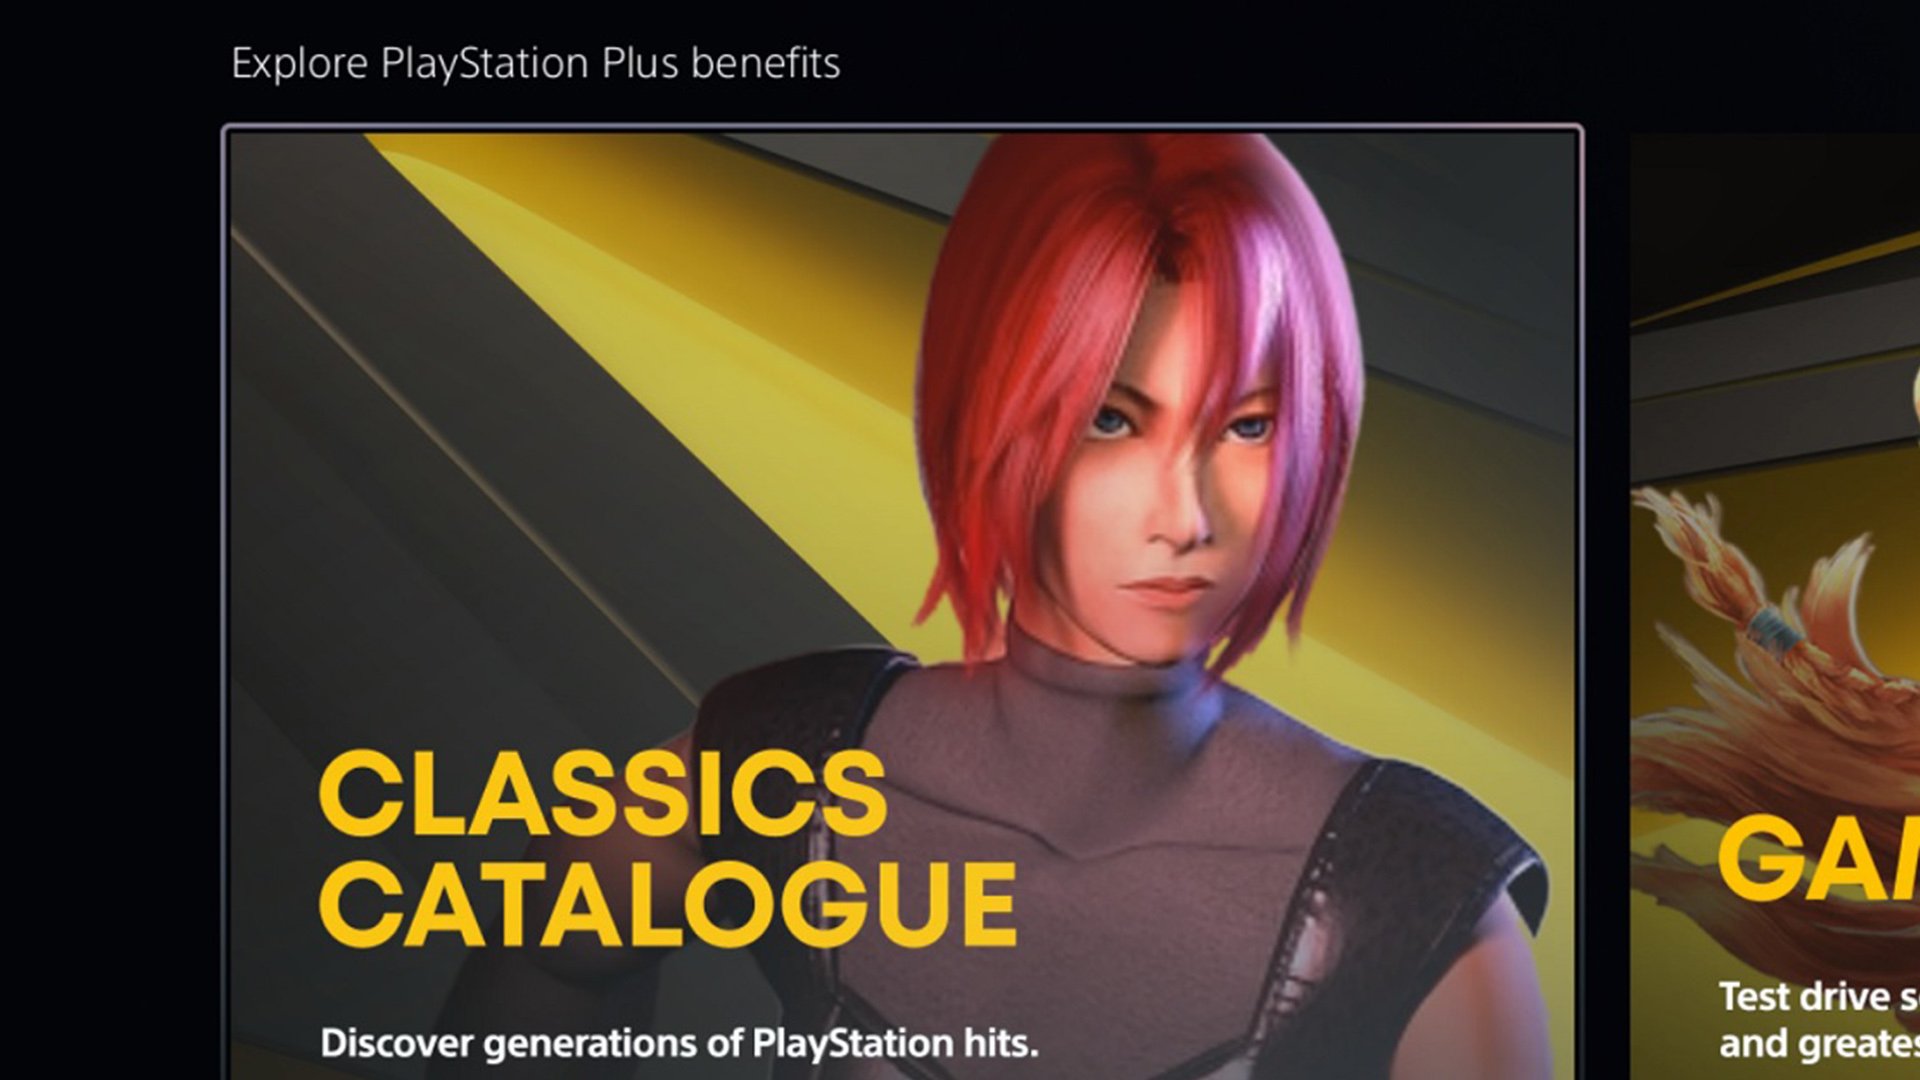 The full PlayStation Plus games library line-up has been confirmed for Asia